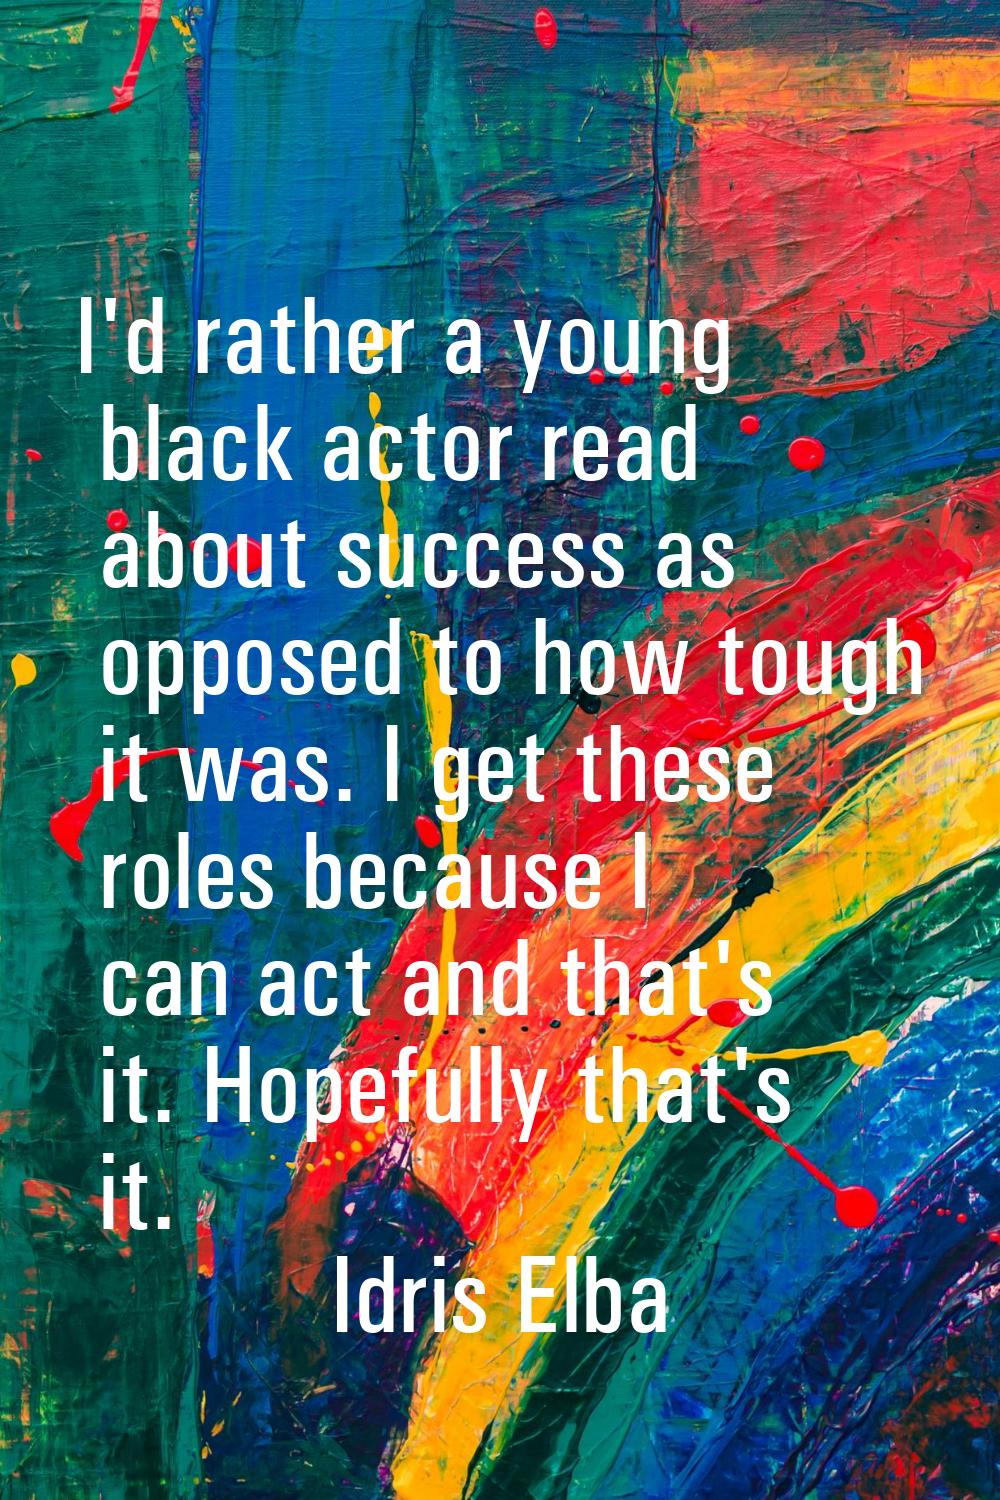 I'd rather a young black actor read about success as opposed to how tough it was. I get these roles